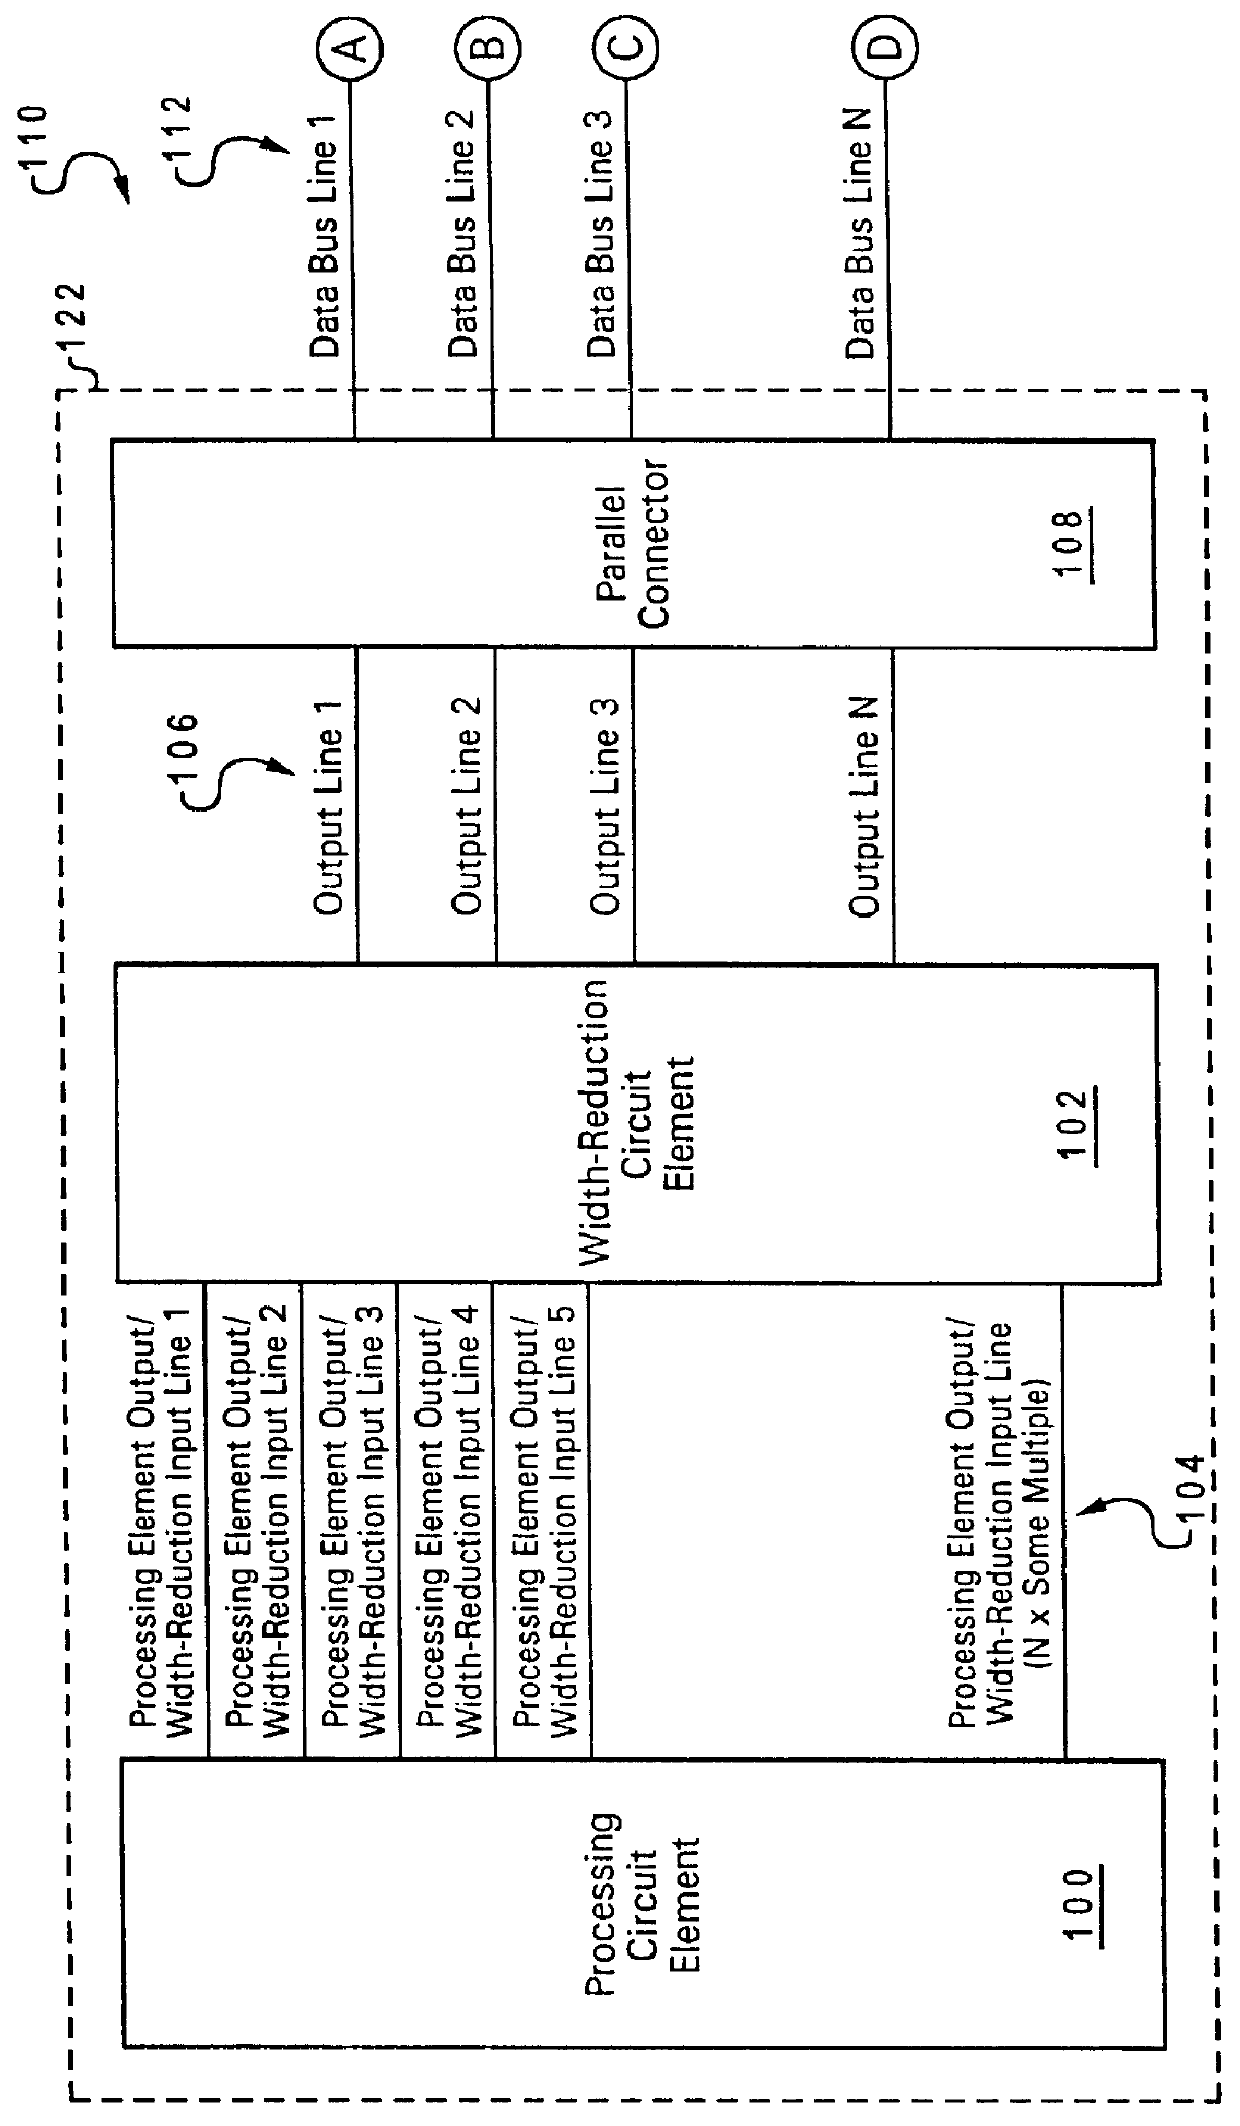 System for providing an increase in digital data transmission rate over a parallel bus by converting binary format voltages to encoded analog format currents